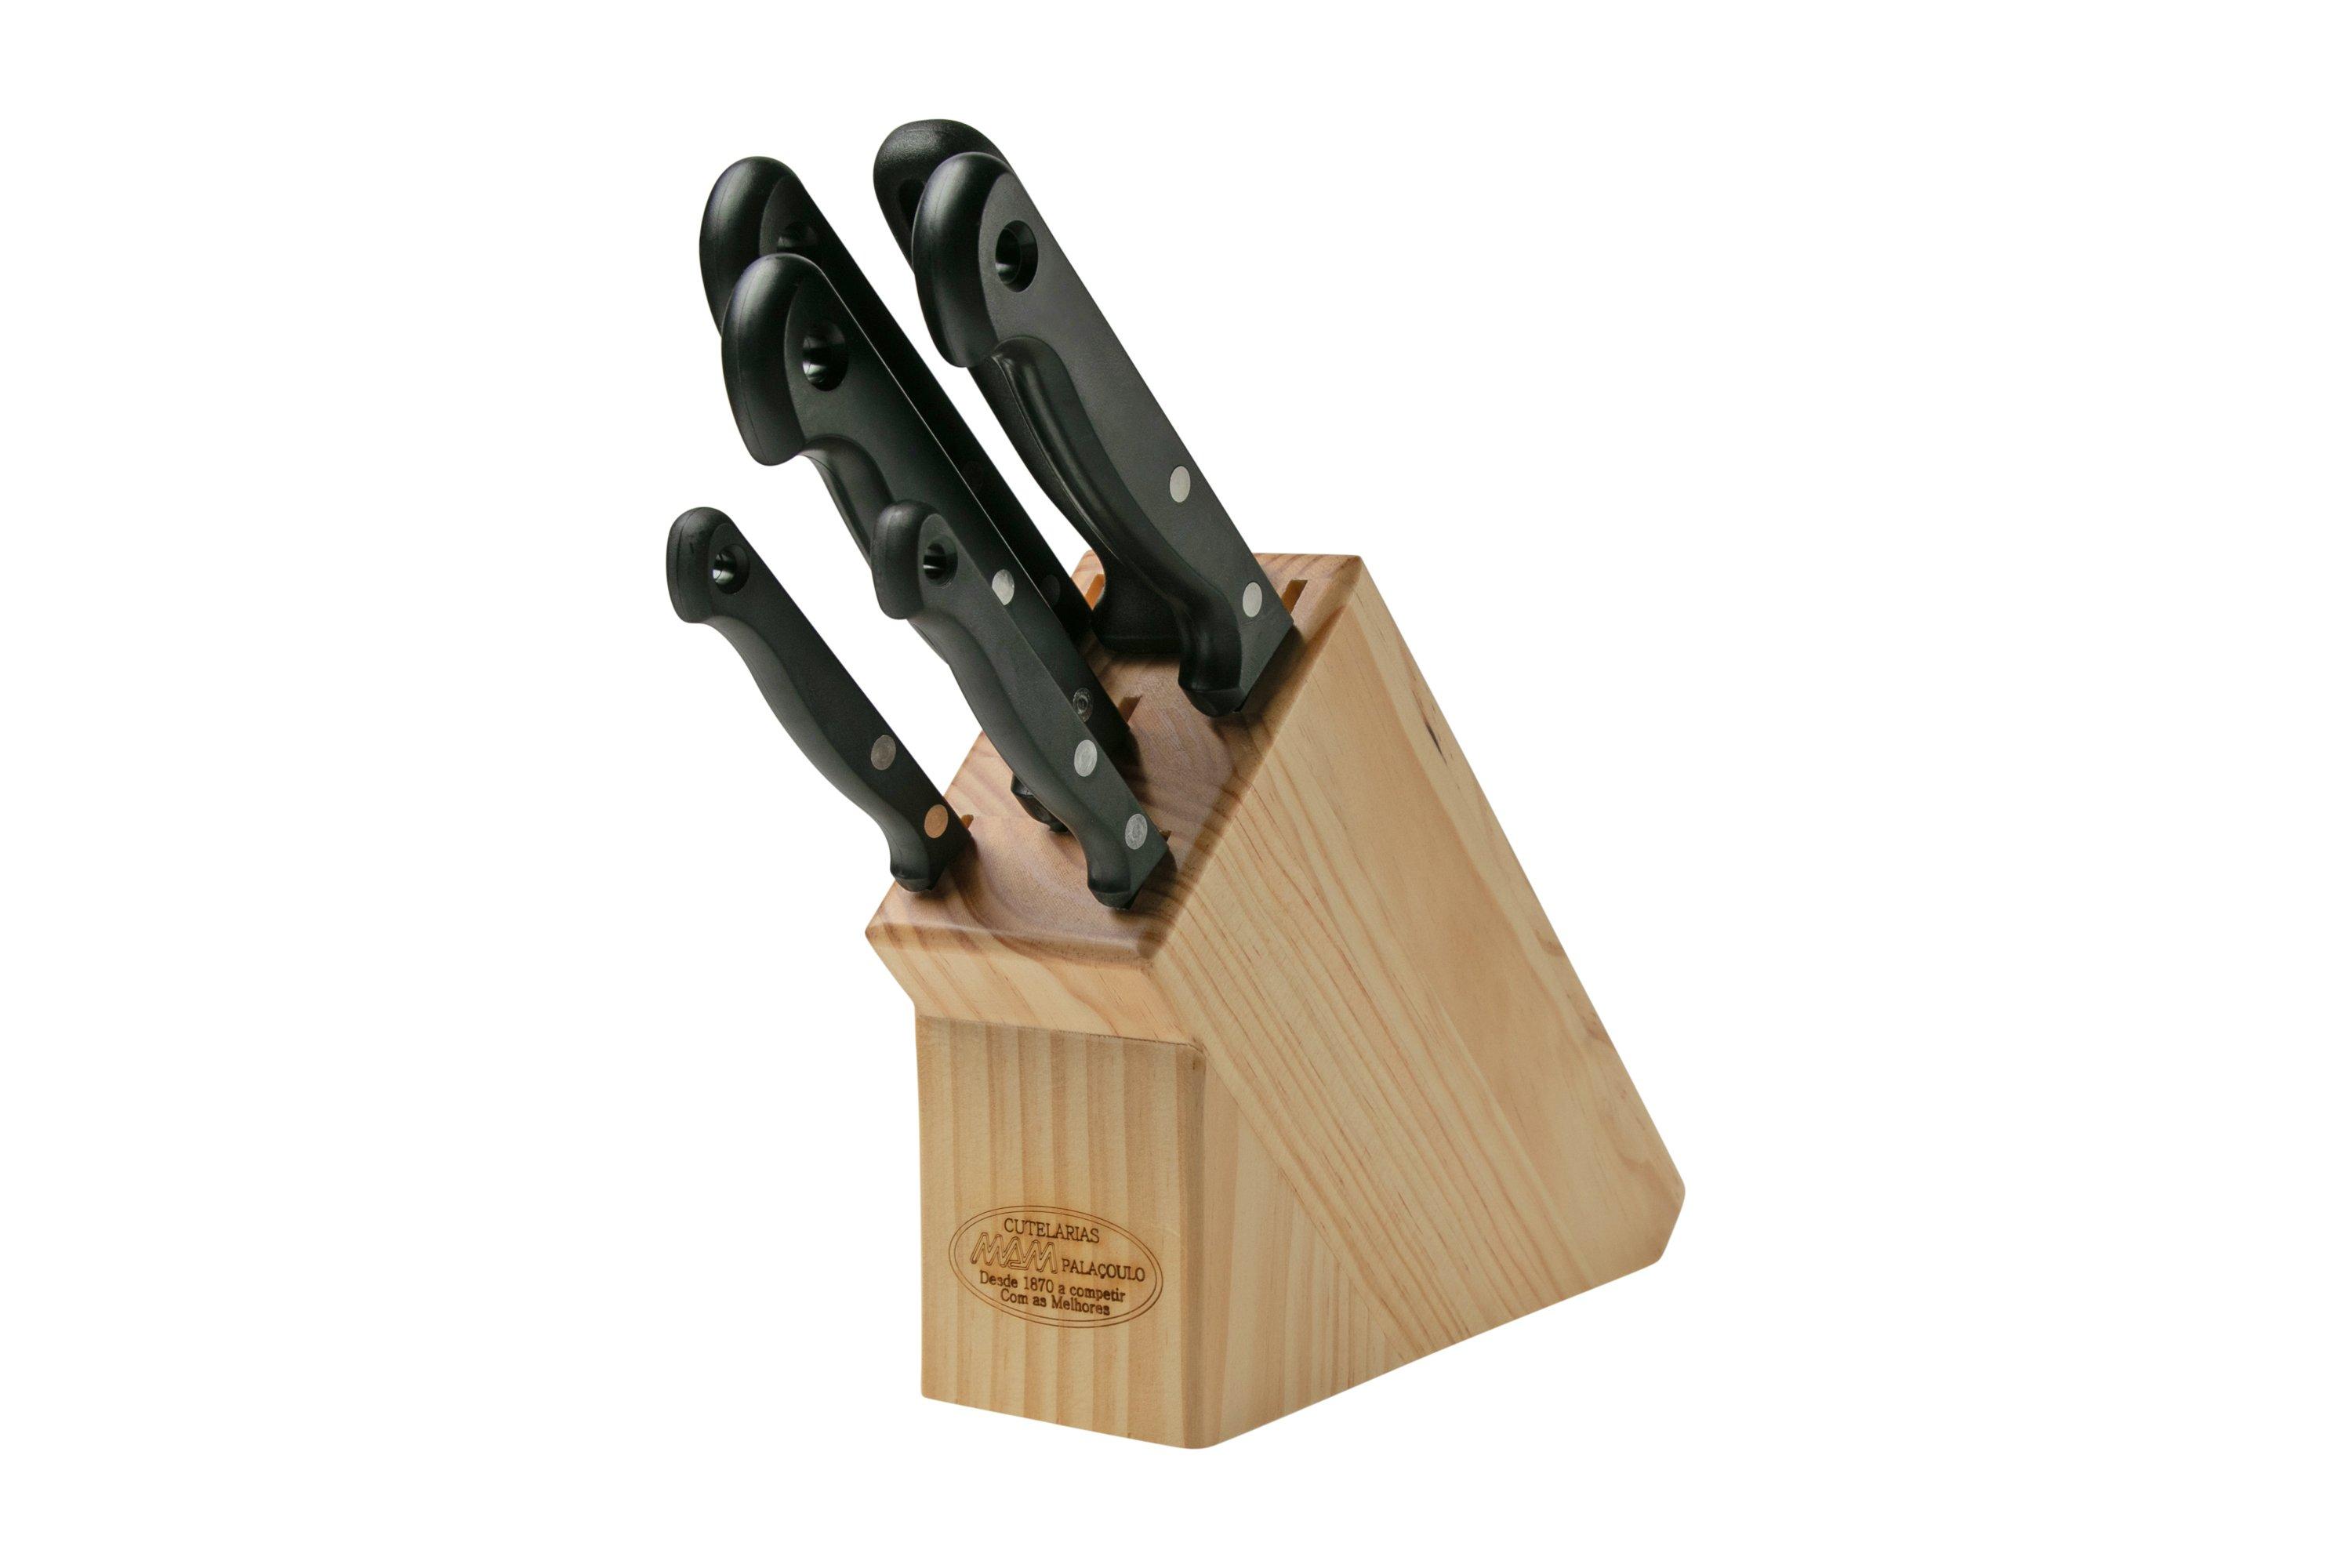 The MasterChef Knife Set 5 Piece from our Colour Collection